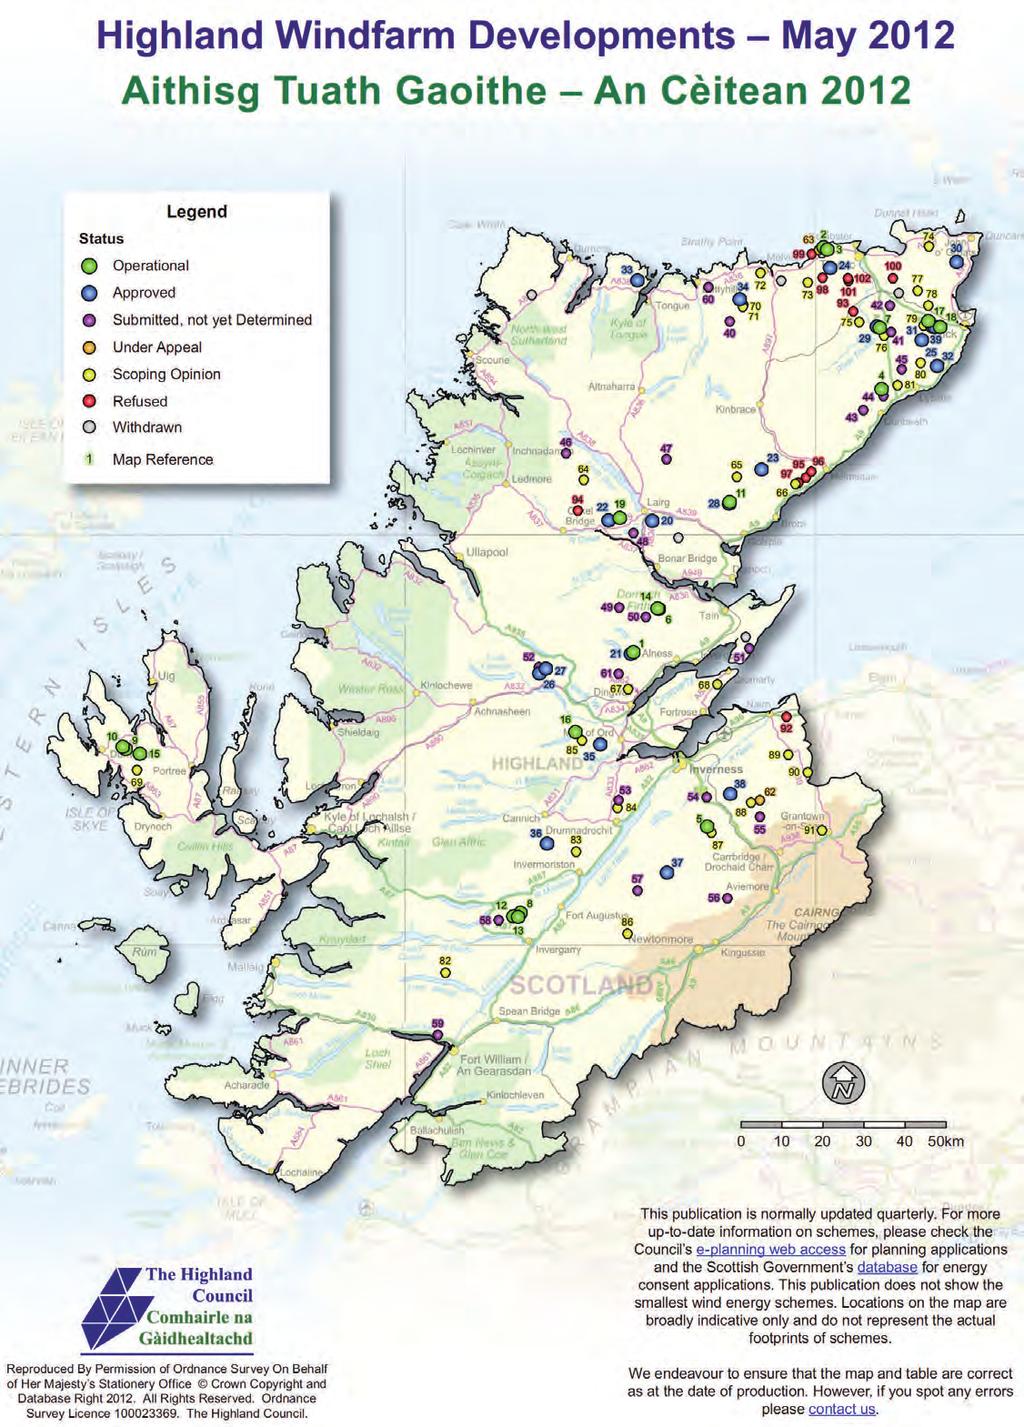 Analysis of the existing transmission network in the north of Scotland identified the need for increased network capacity to facilitate the transmission of renewable generation projects north of